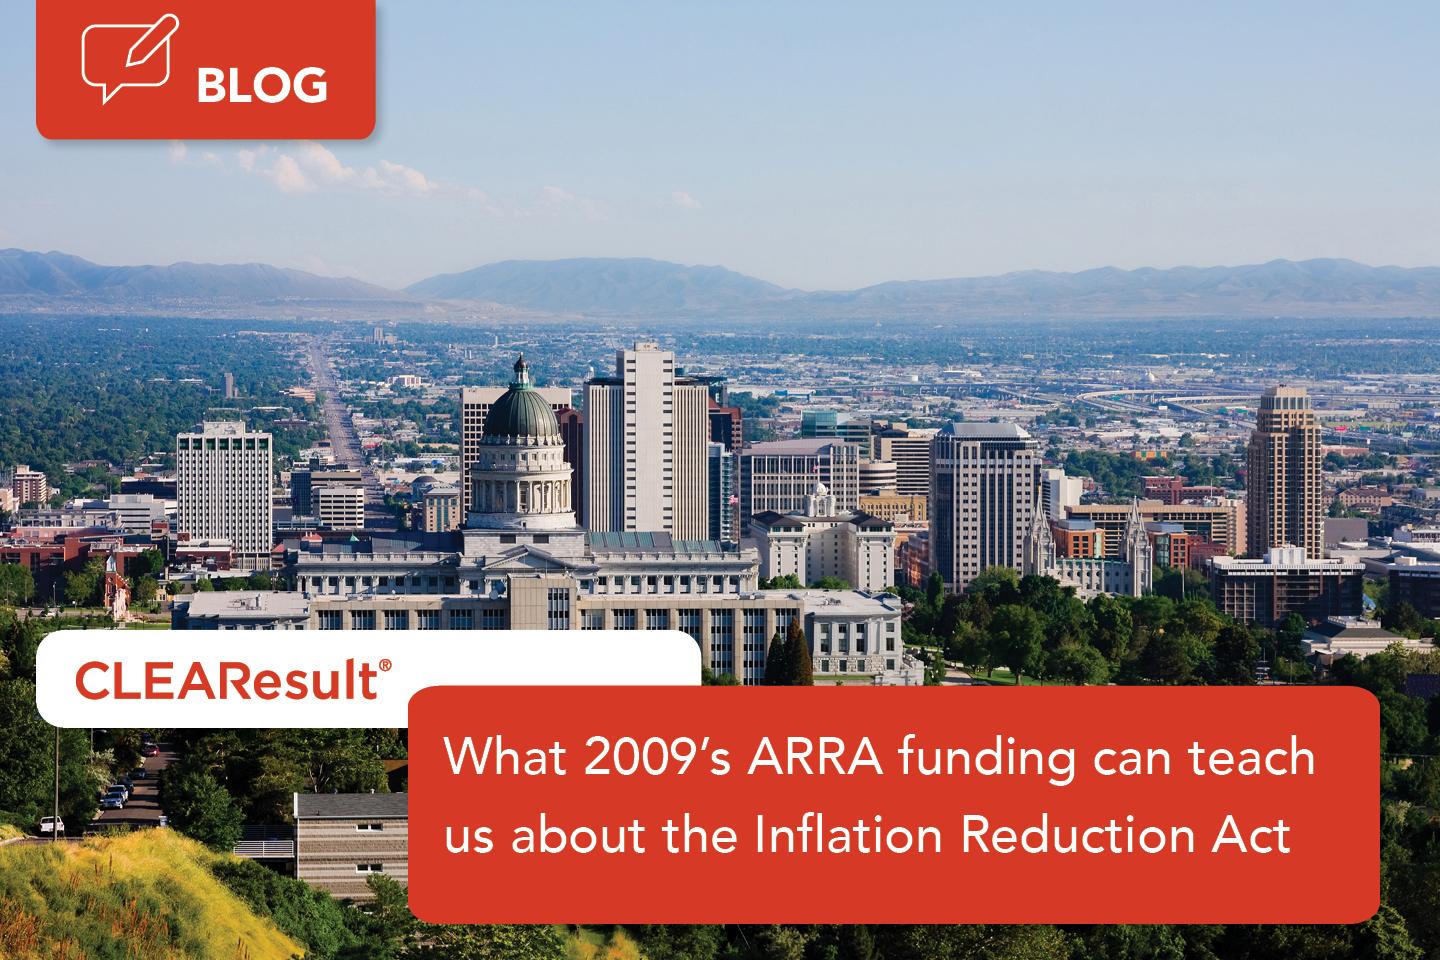 What 2009’s ARRA funding can teach us about the Inflation Reduction Act